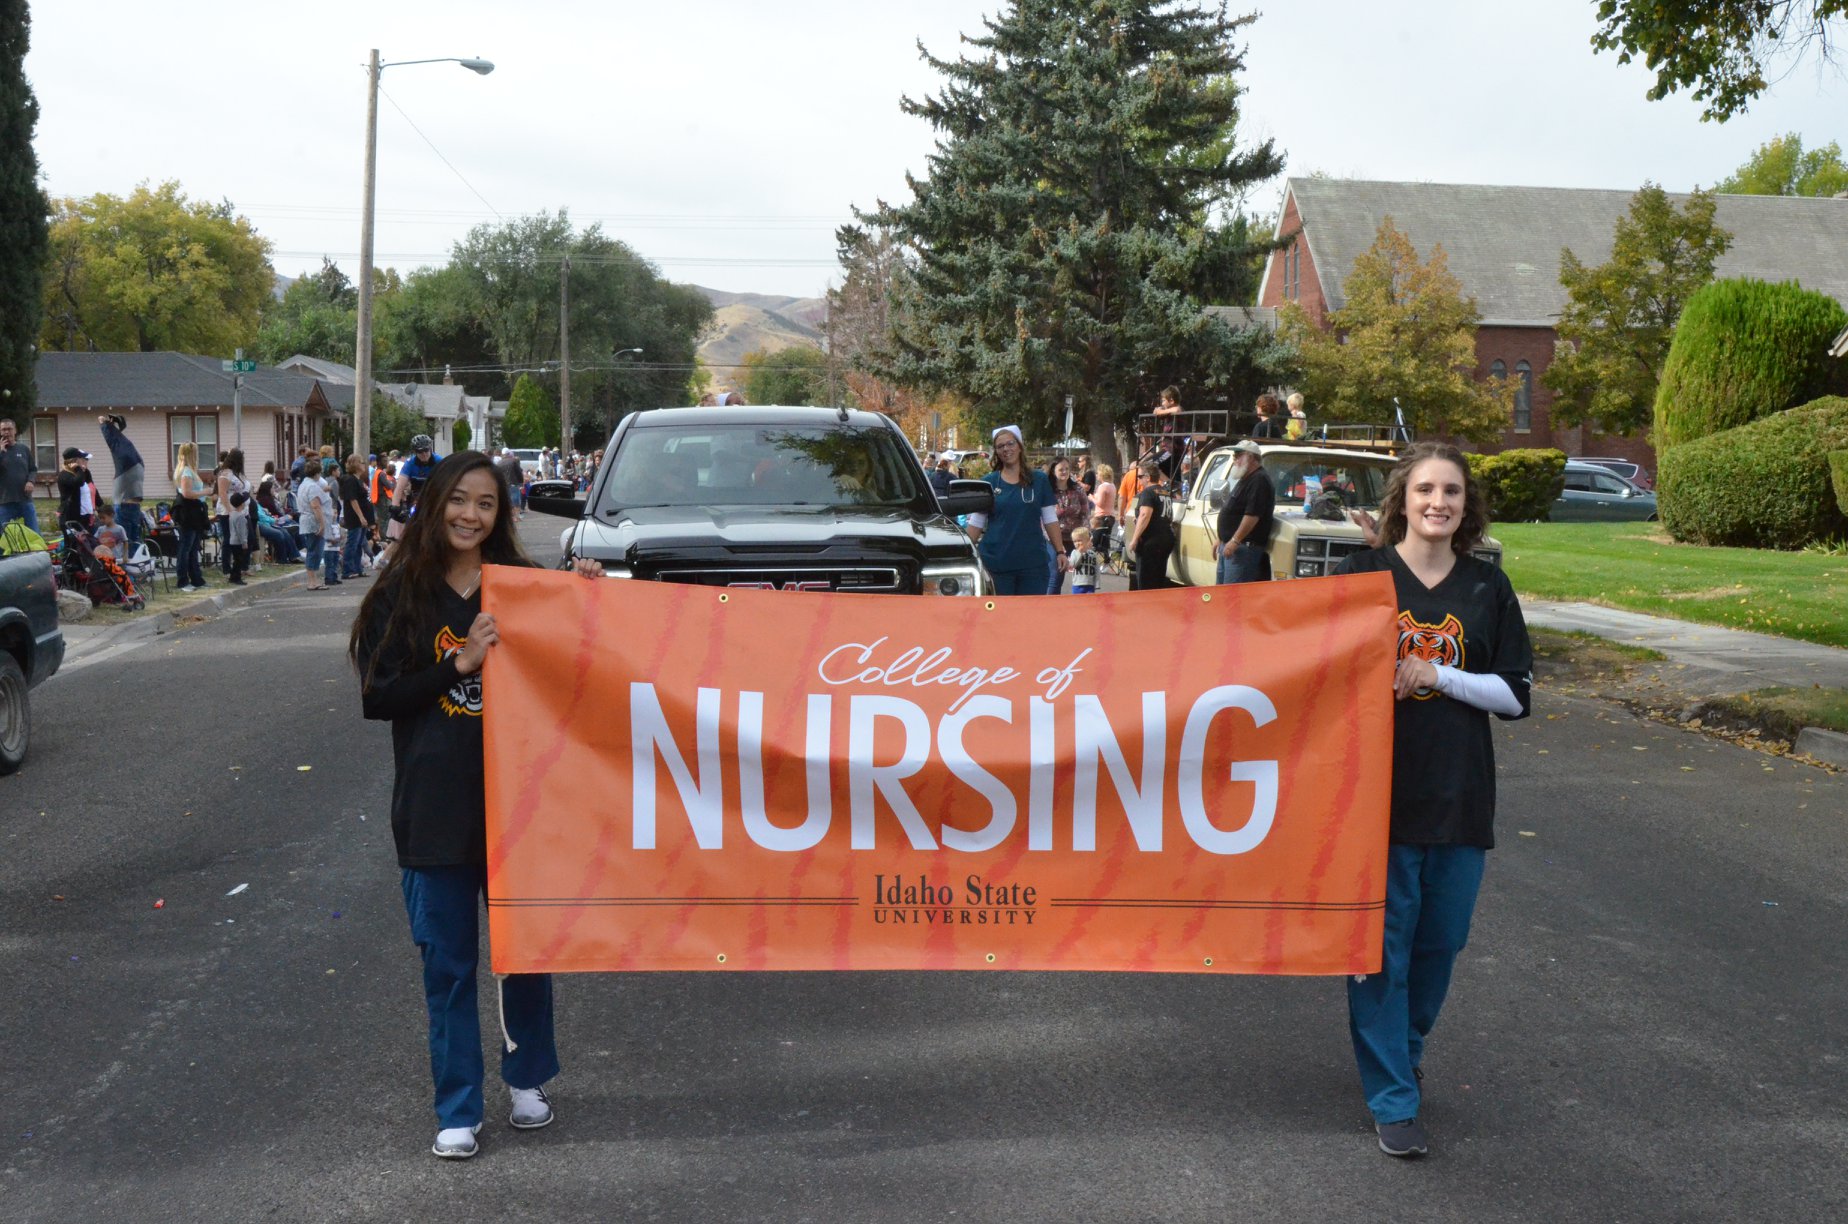 College of Nursing students walk with banner in the 2018 Homecoming parade